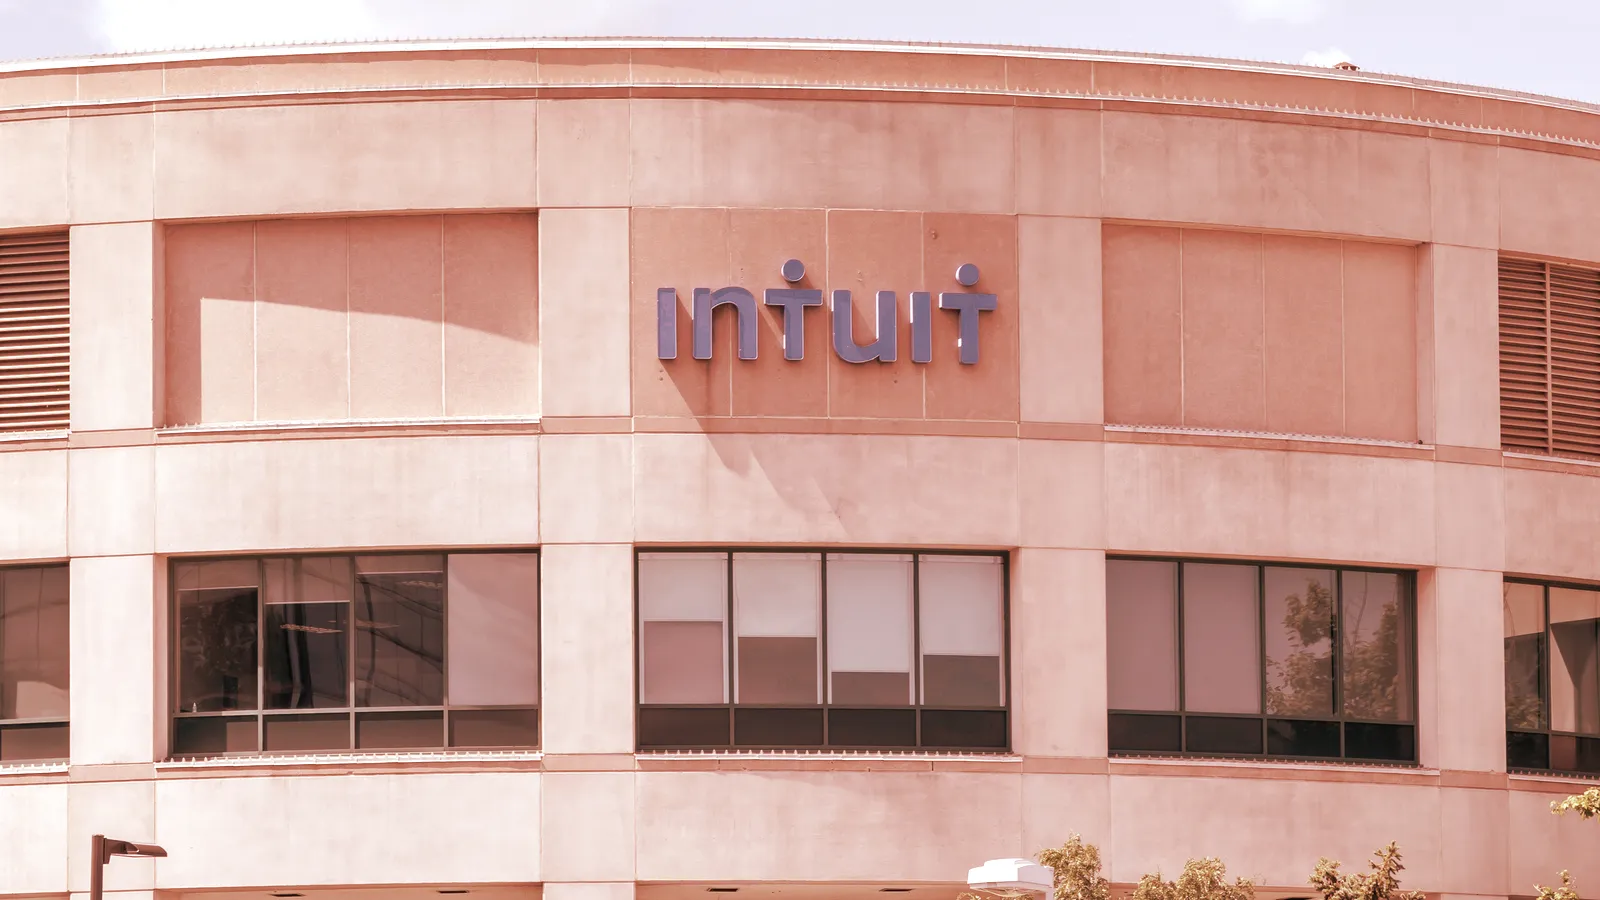 Intuit is a financial services firm. Image: Shutterstock.